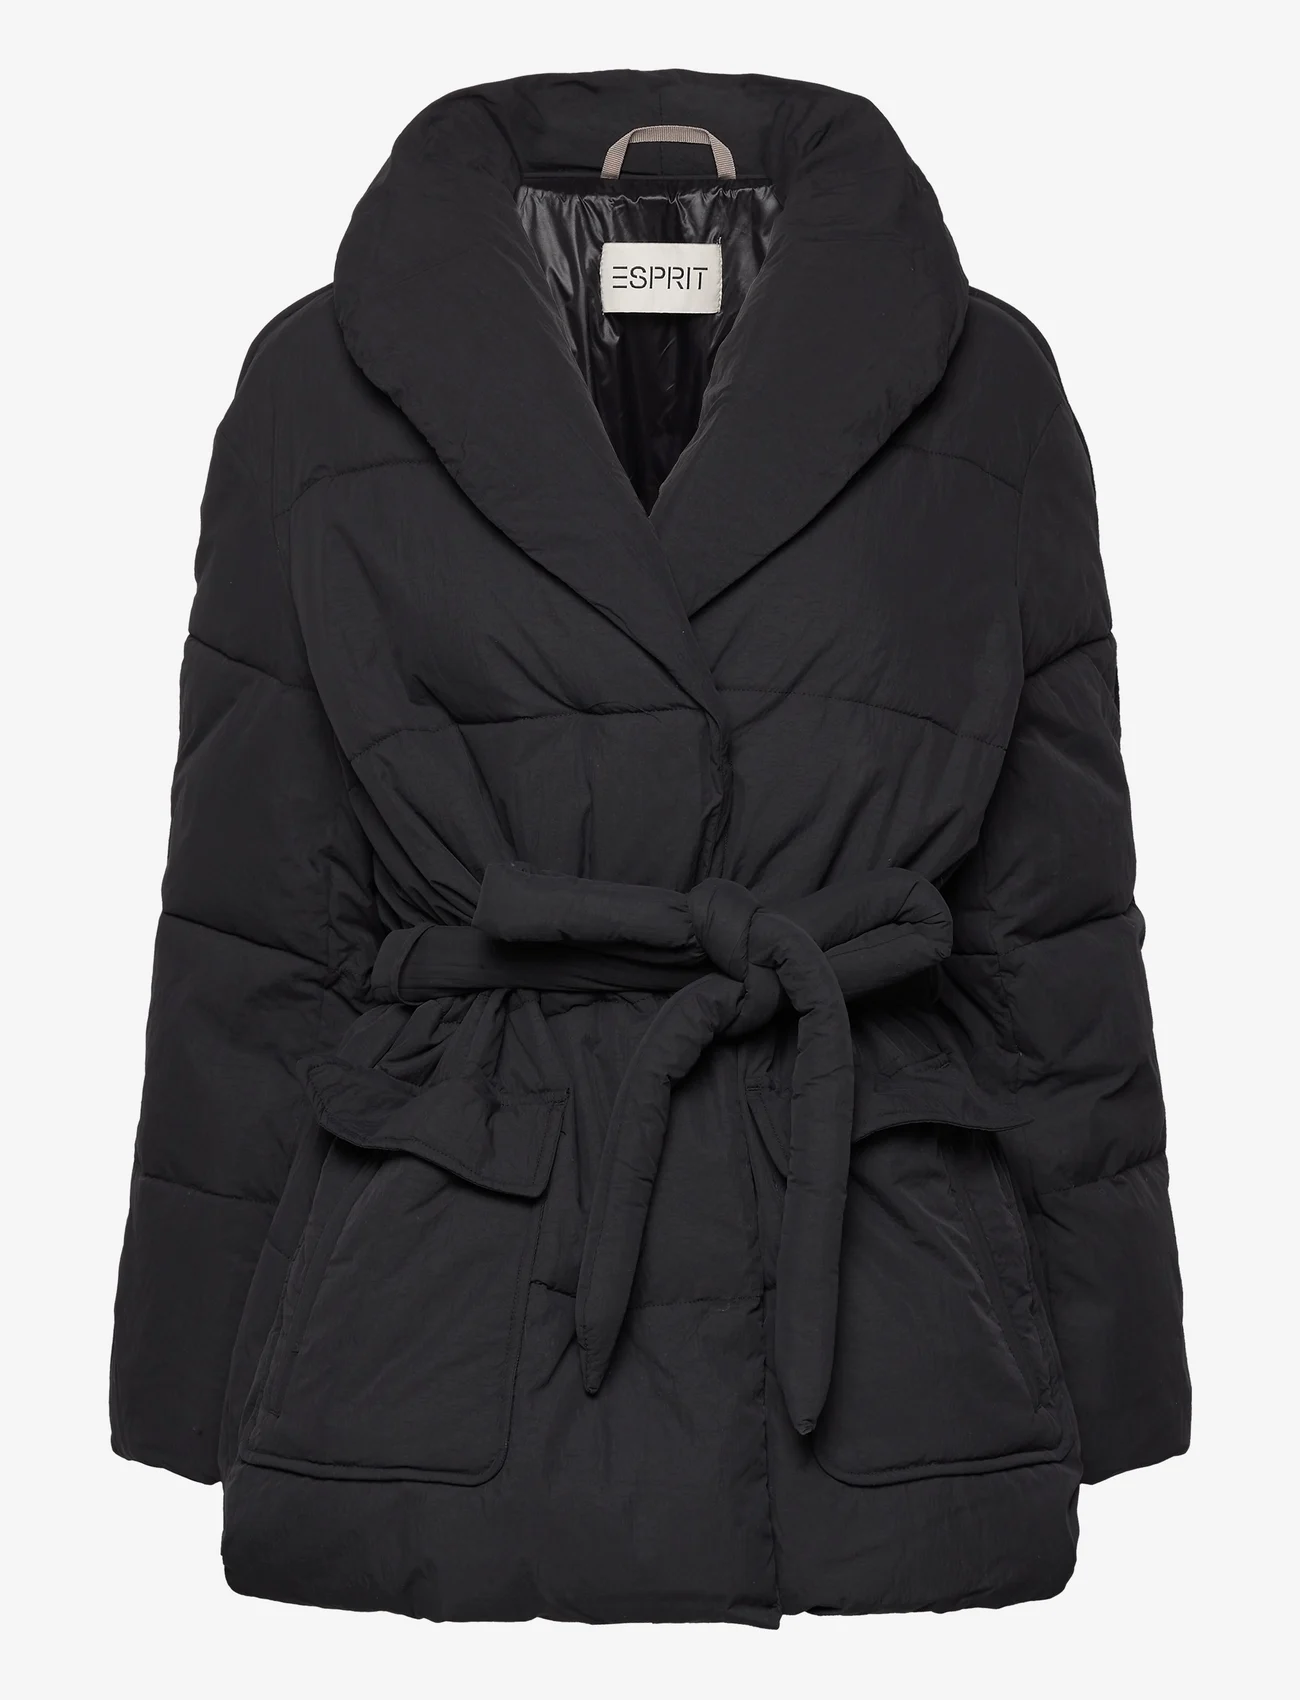 Esprit Casual - Quilted puffer jacket with belt - kurtki puchowe - black - 0